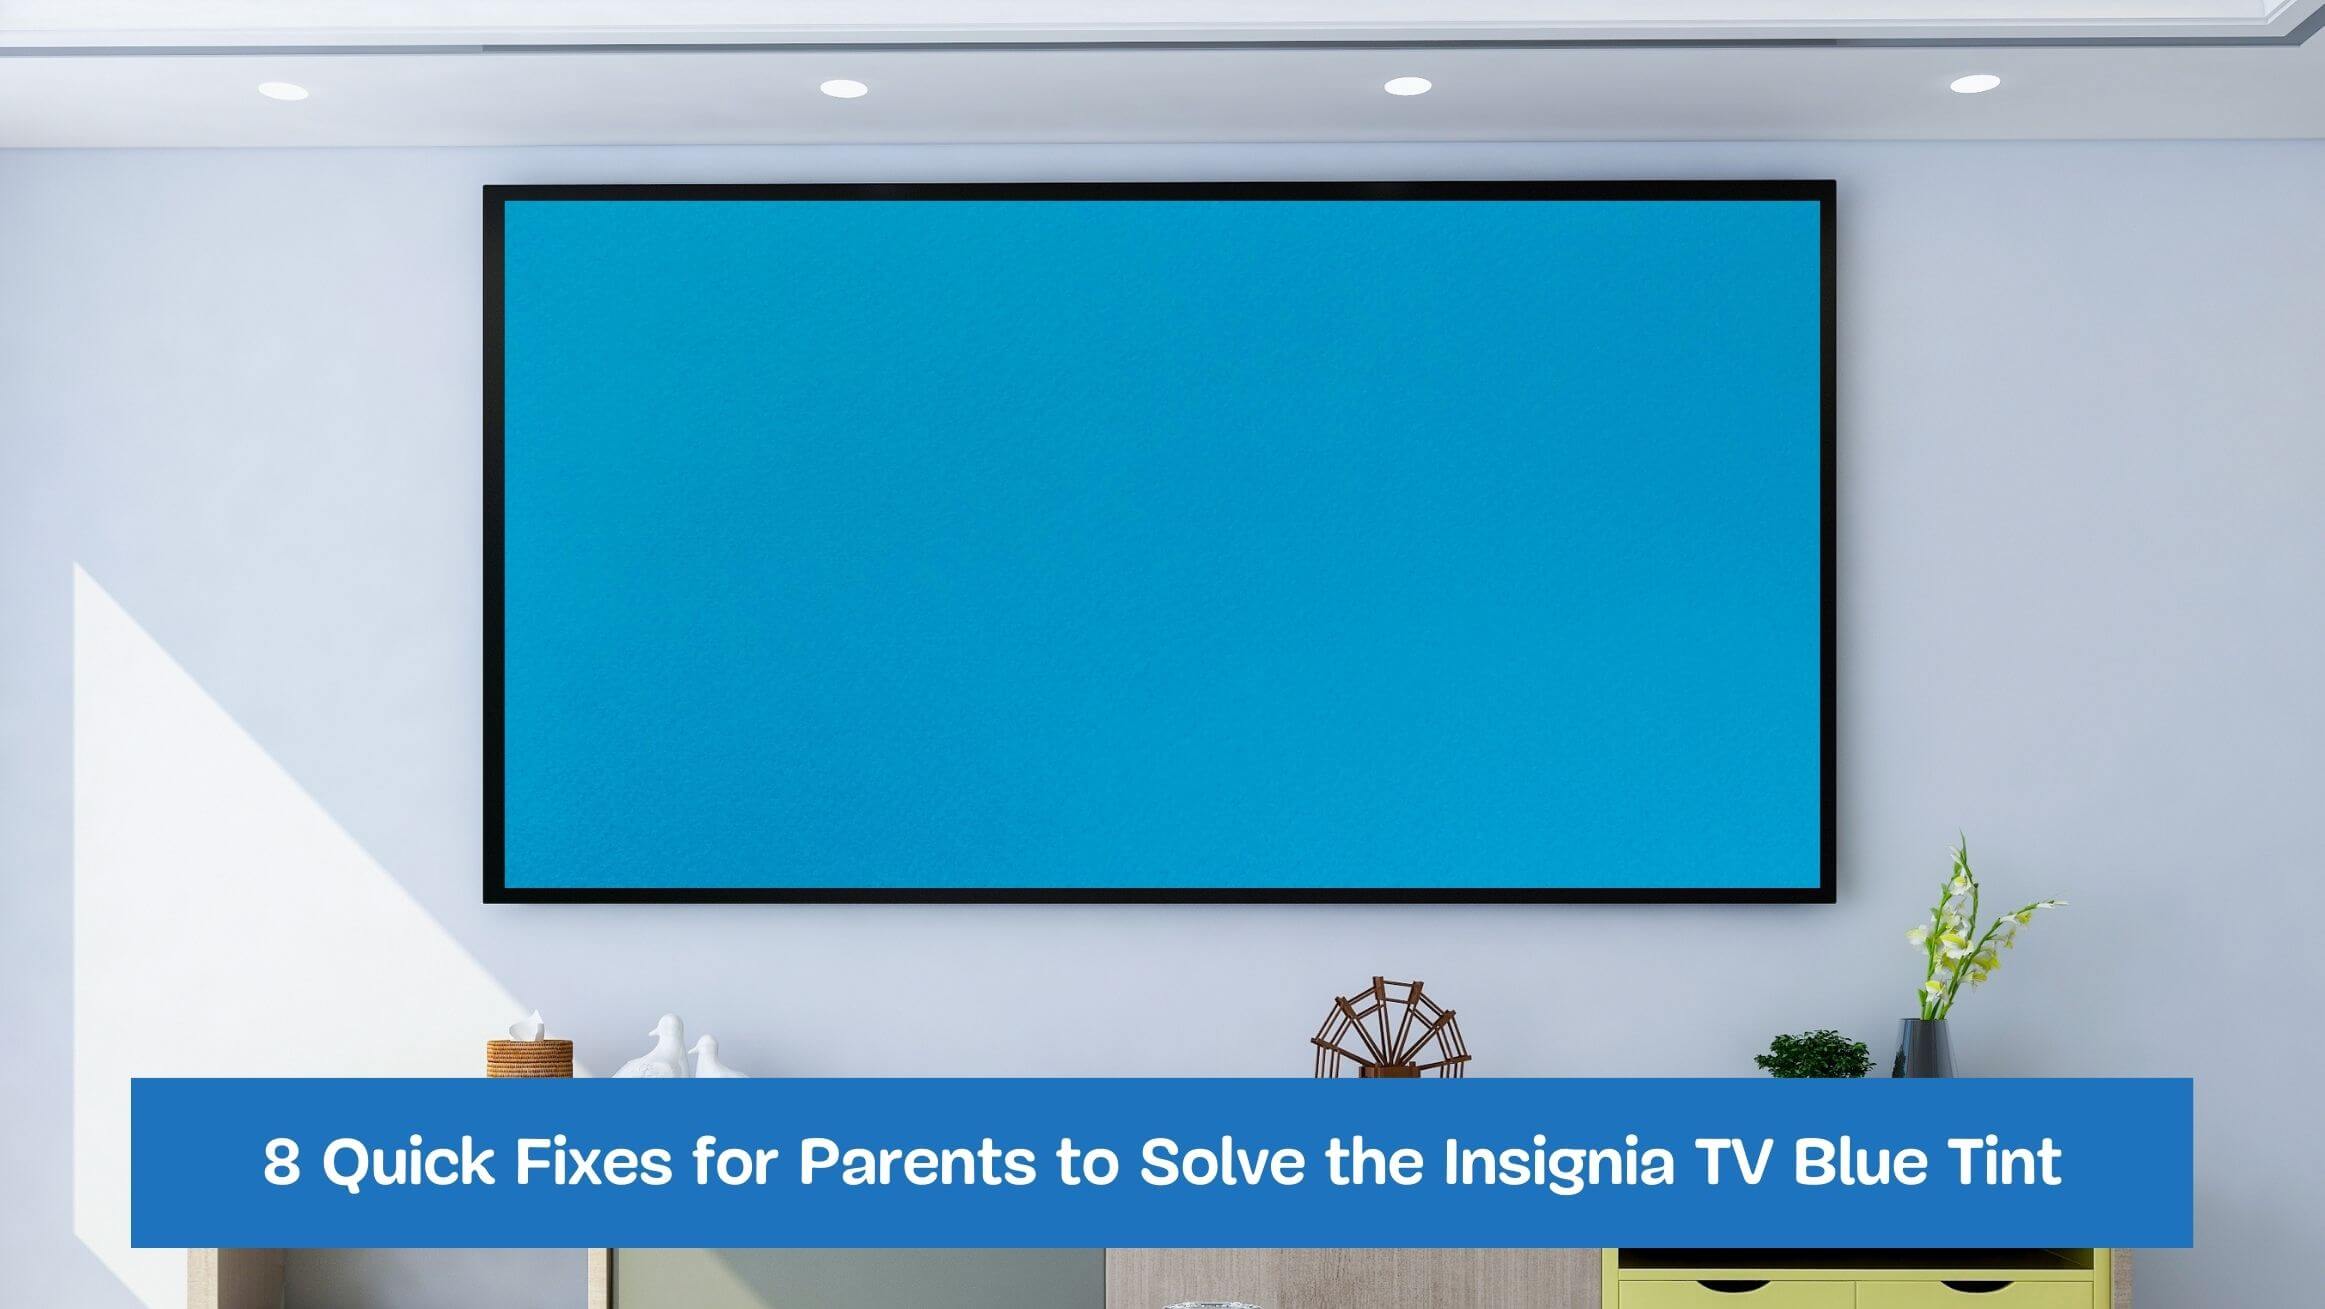 8 Quick Fixes for Parents to Solve the Insignia TV Blue Tint